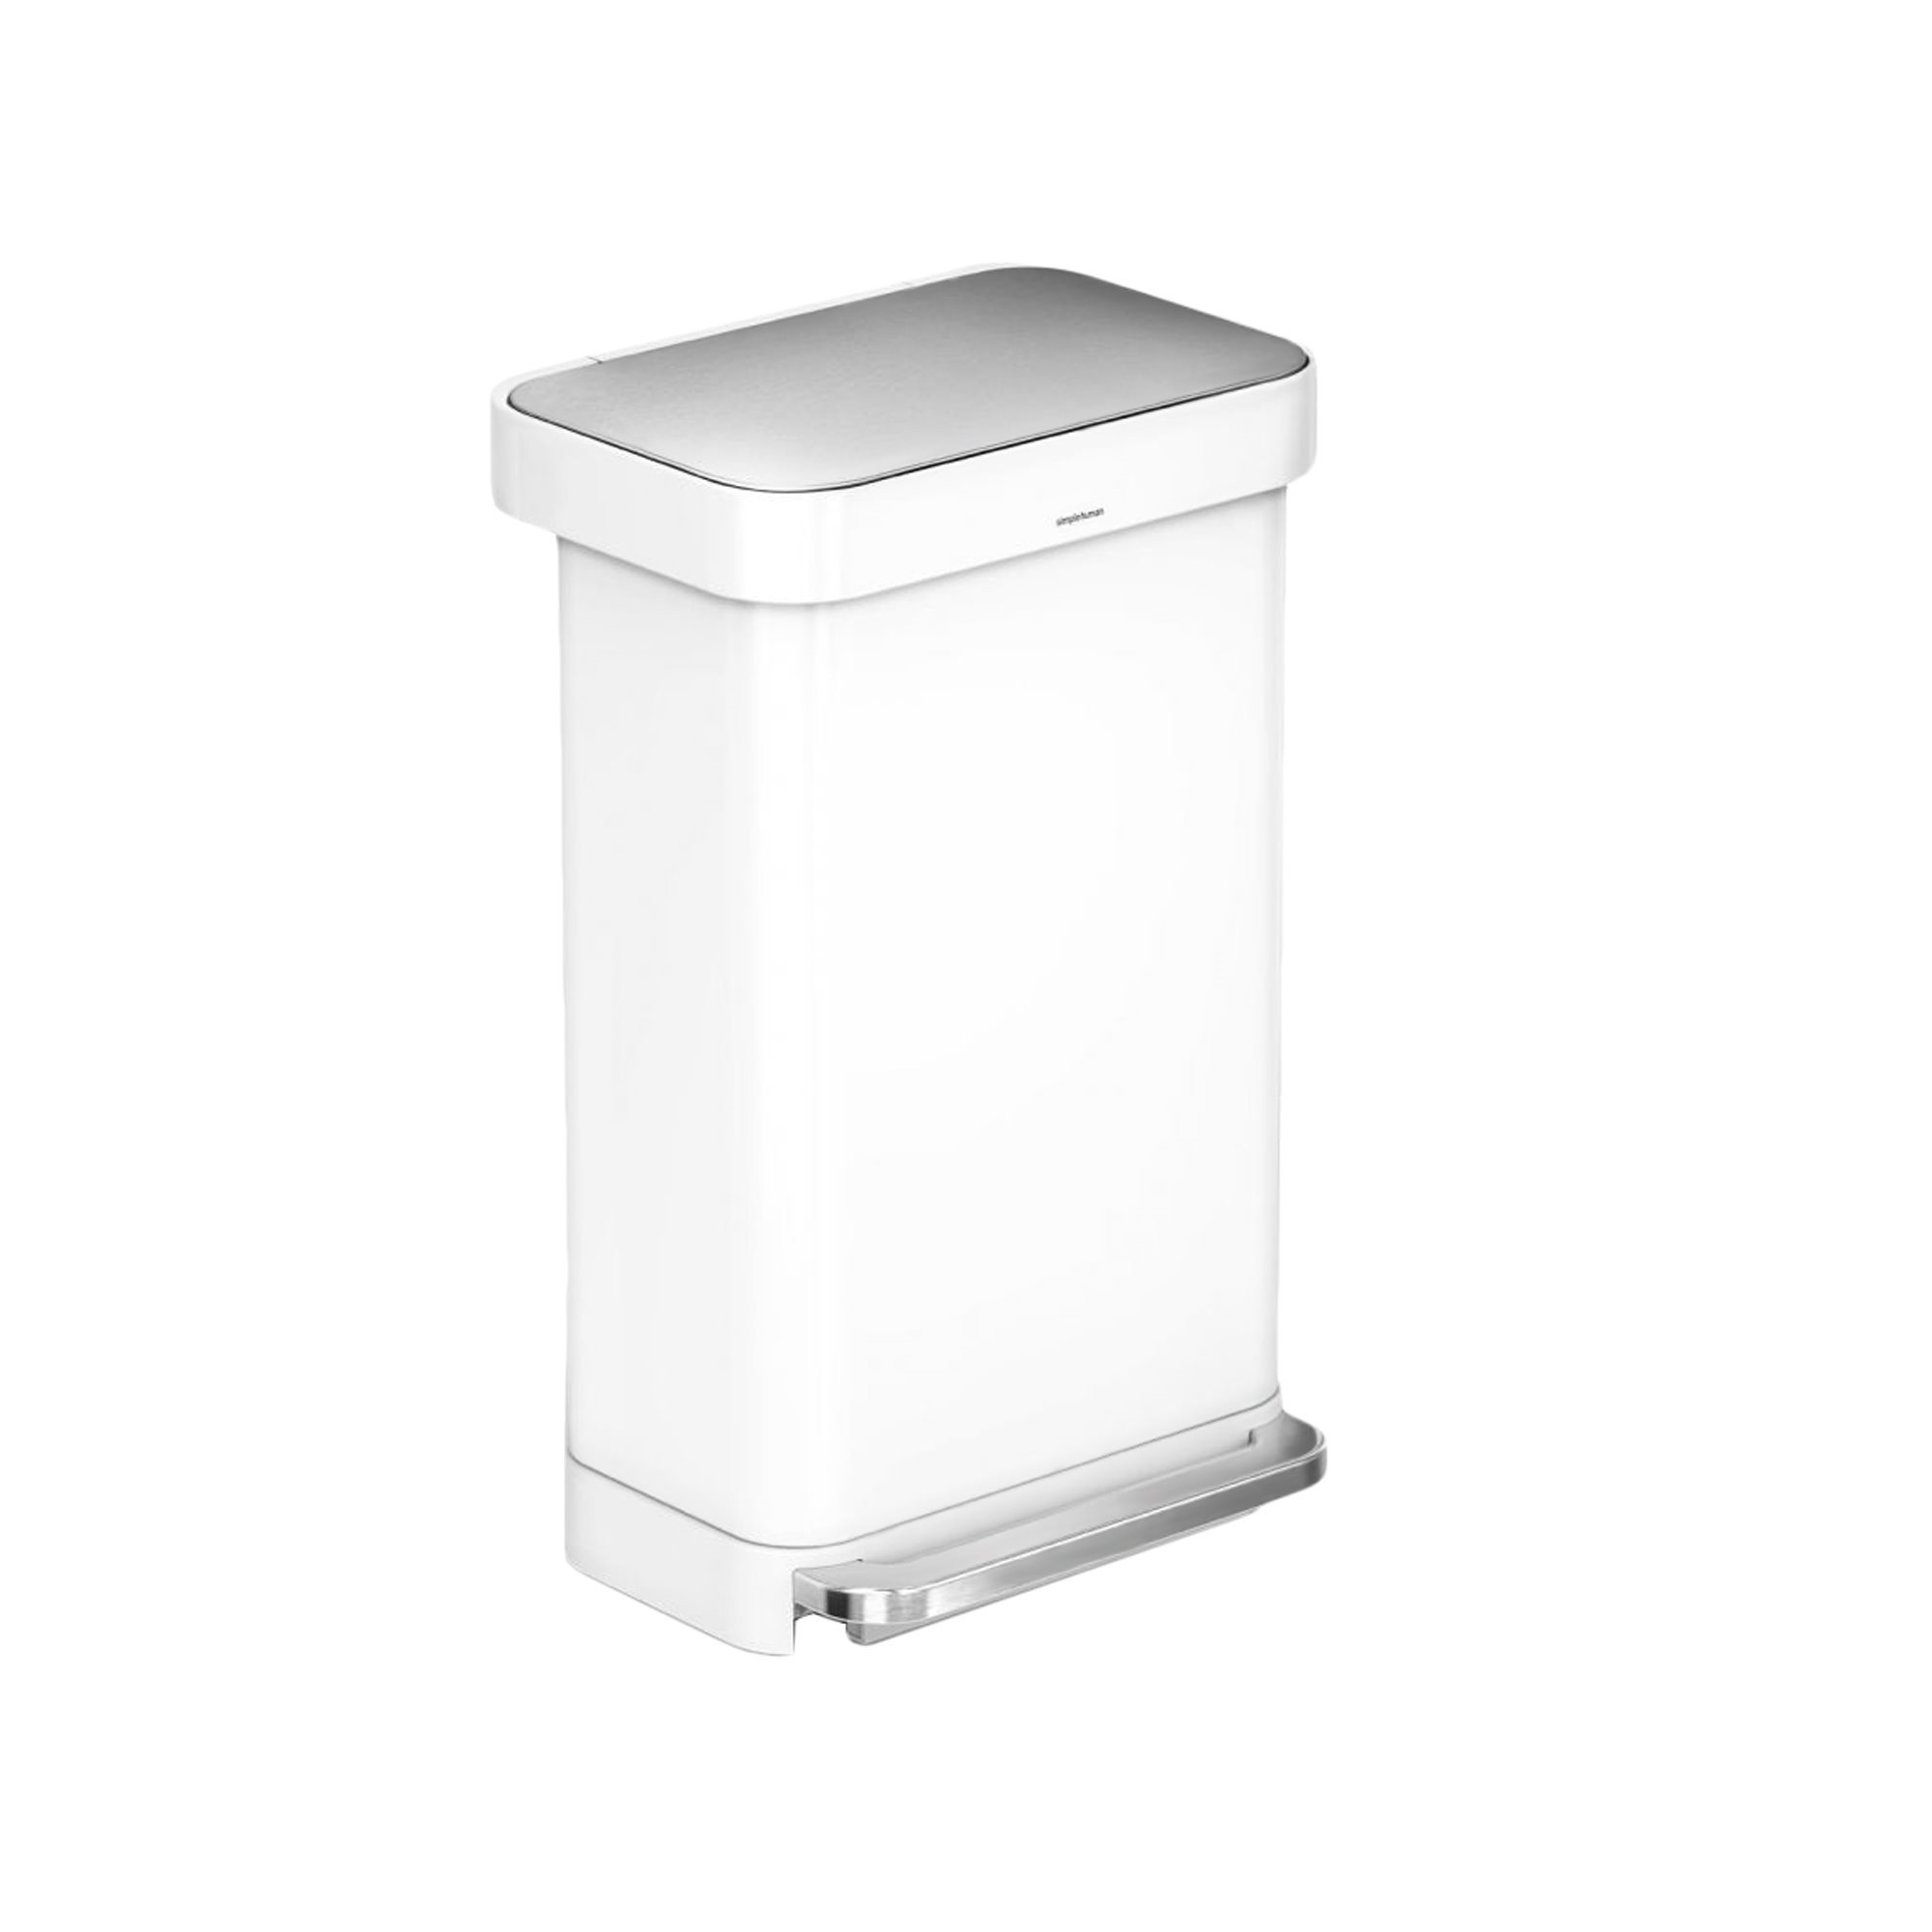 simplehuman 4L Compost Caddy Brushed Stainless Steel Bin for sale online